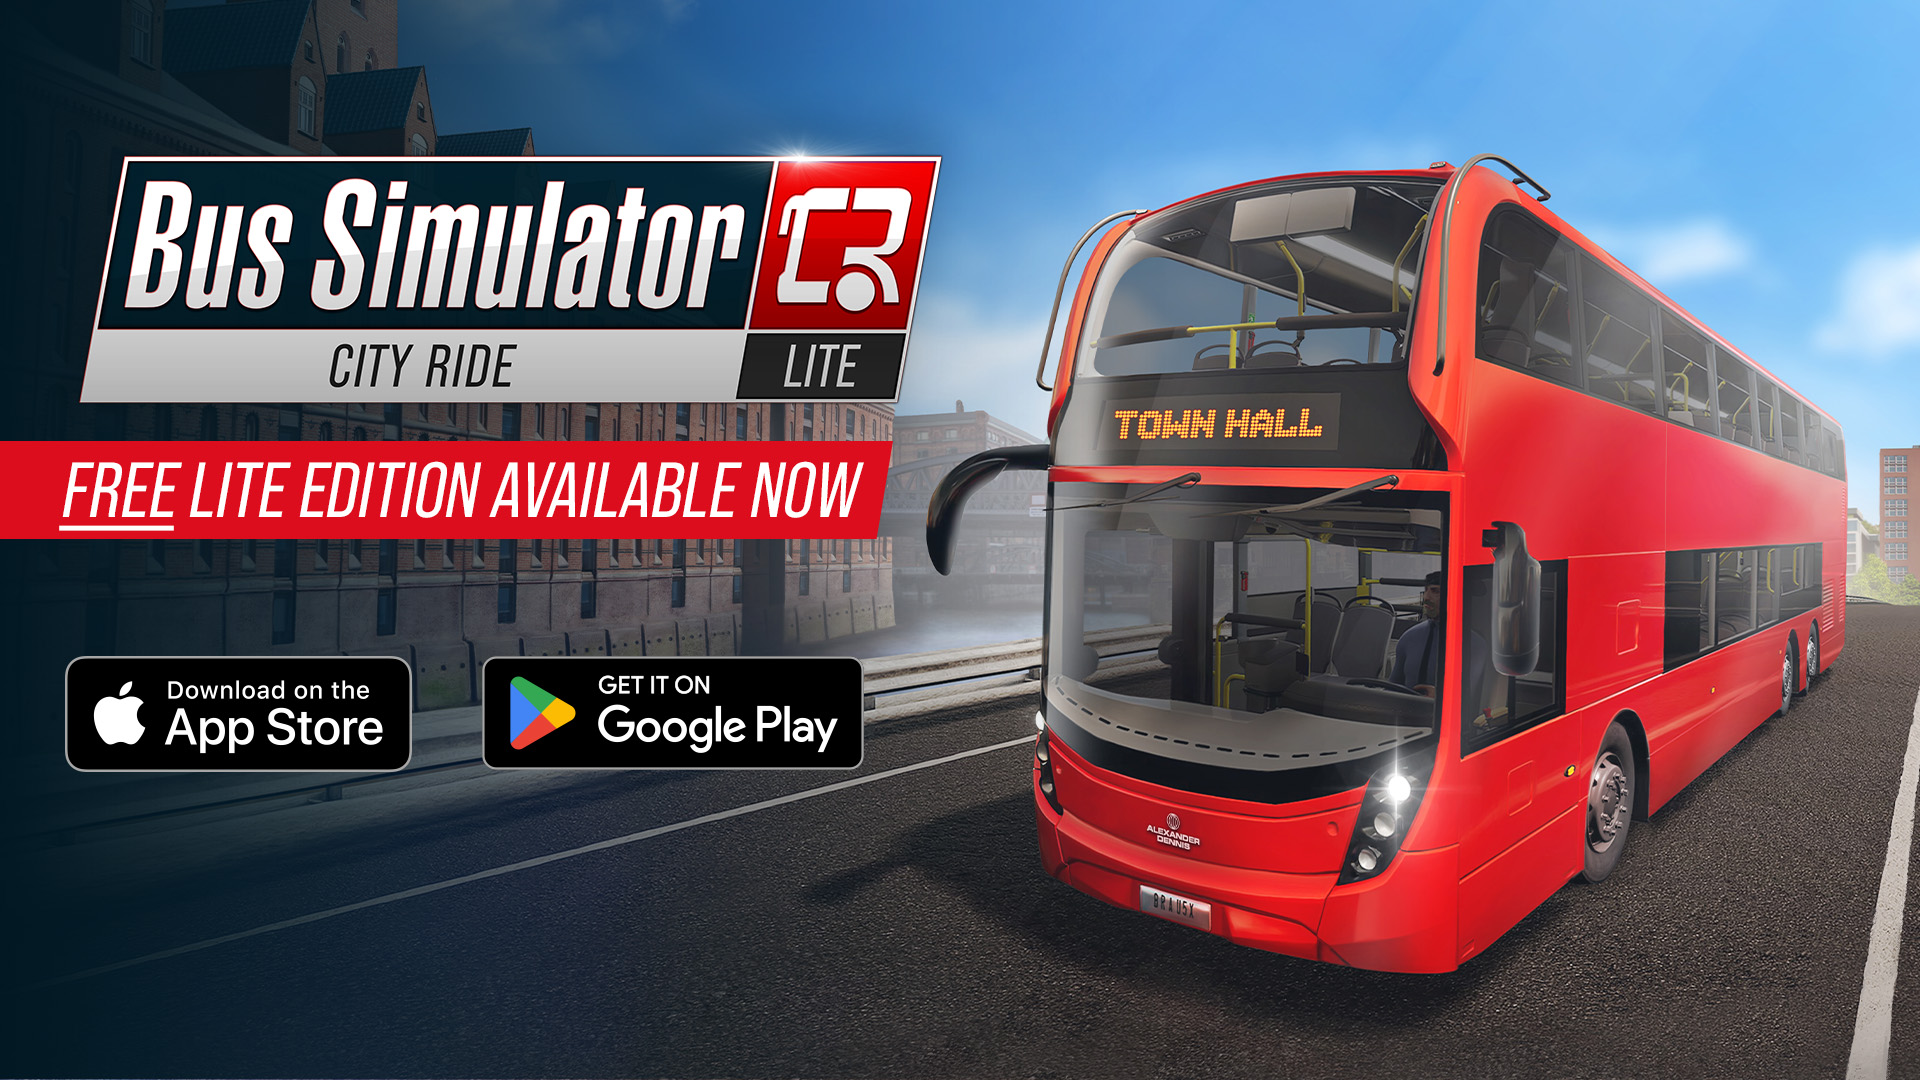 Public Transport Bus Simulator Game for Android - Download